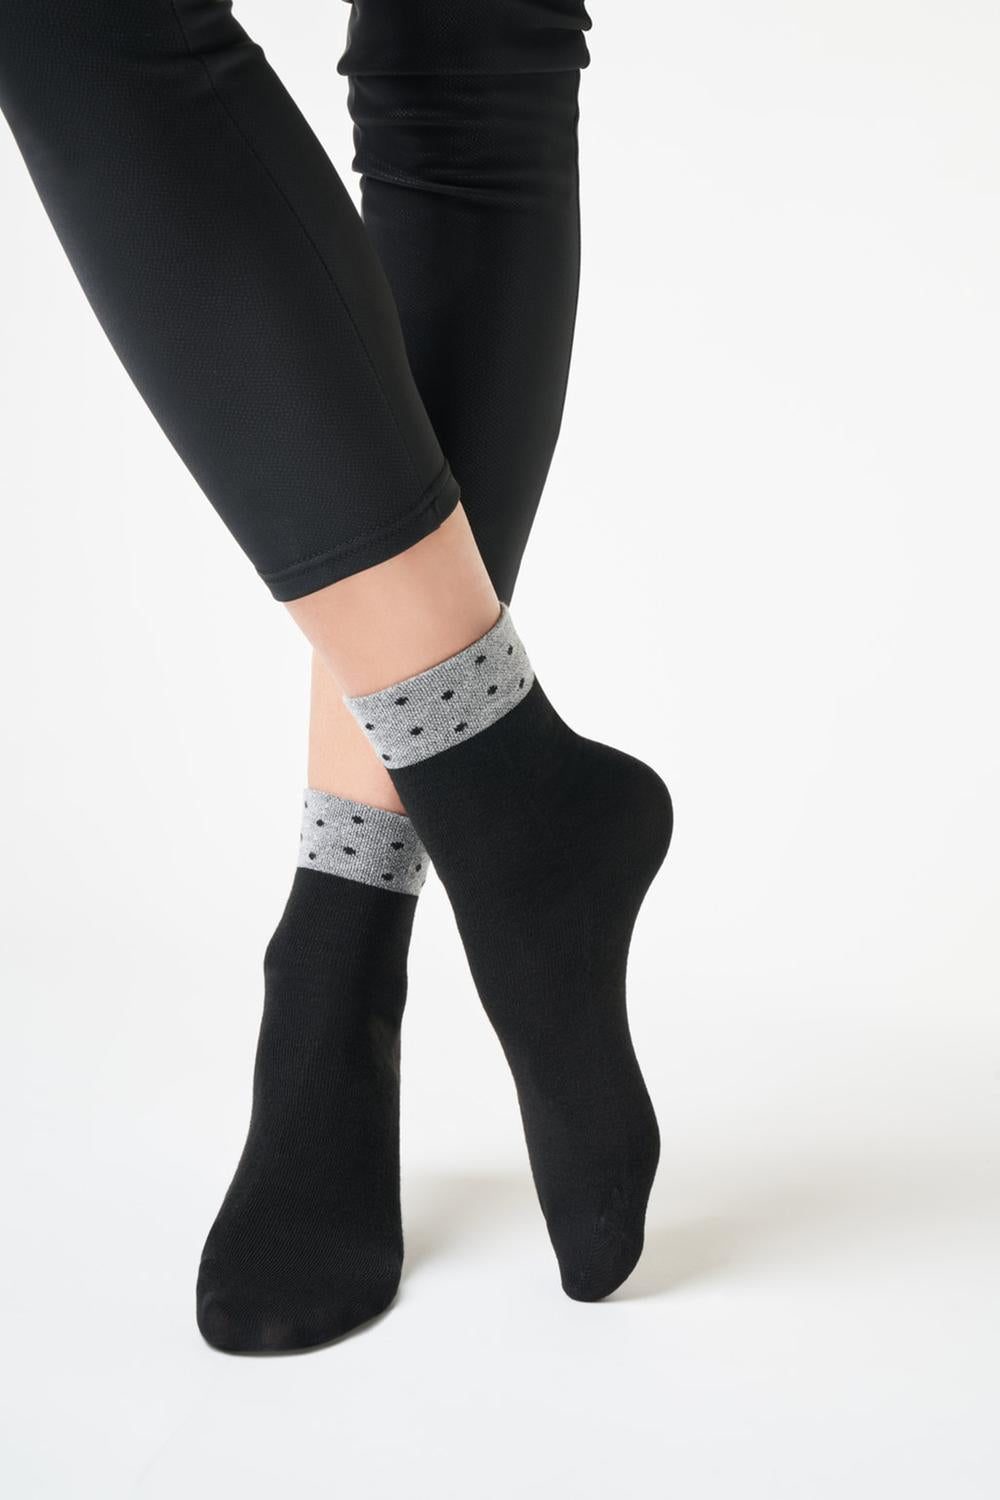 SiSi Pois Calzino - Soft black viscose mix tube ankle socks with a sparkly silver cuff with black polka dot pattern and flat toe seam.